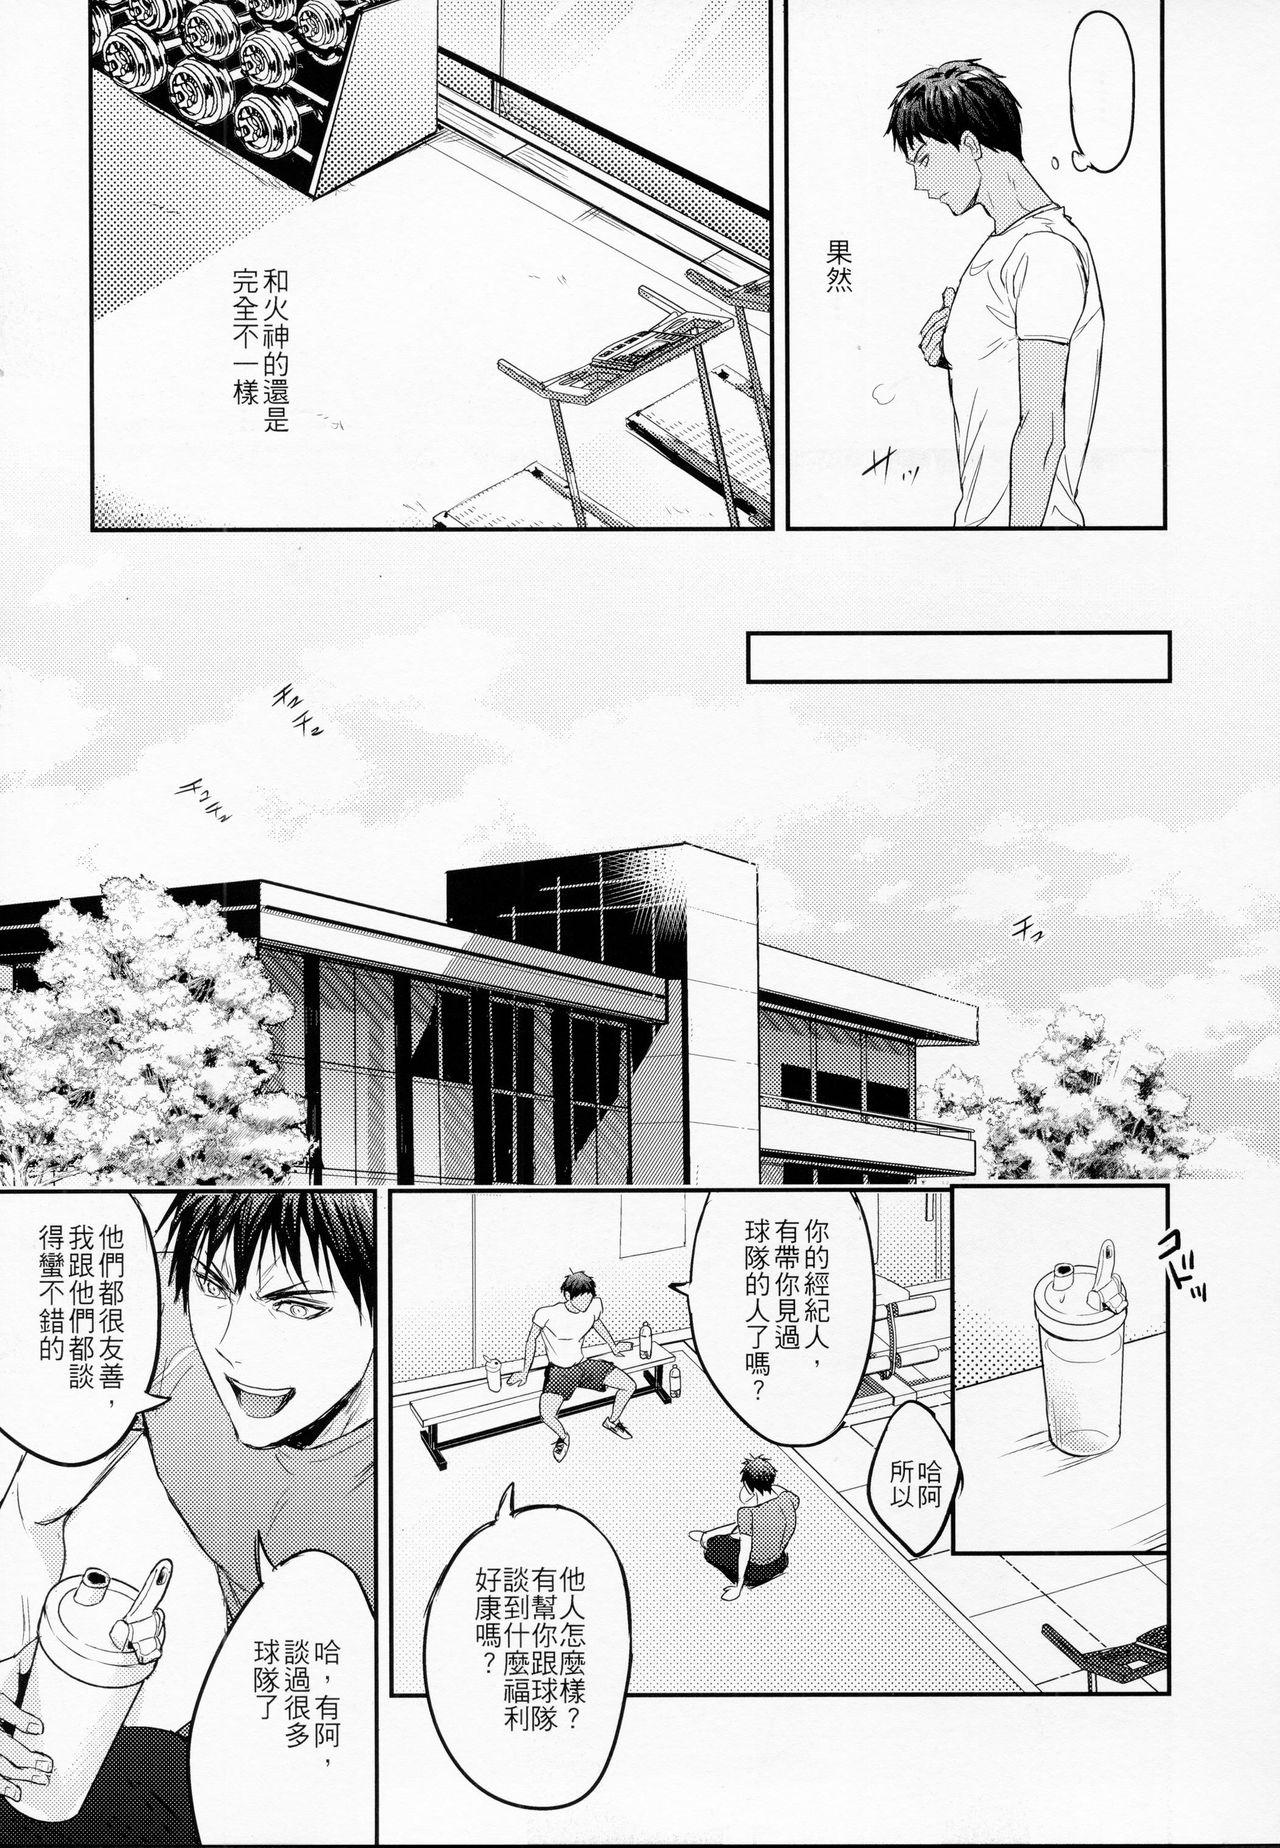 African This is how we WORK IT OUT - Kuroko no basuke Stranger - Page 6